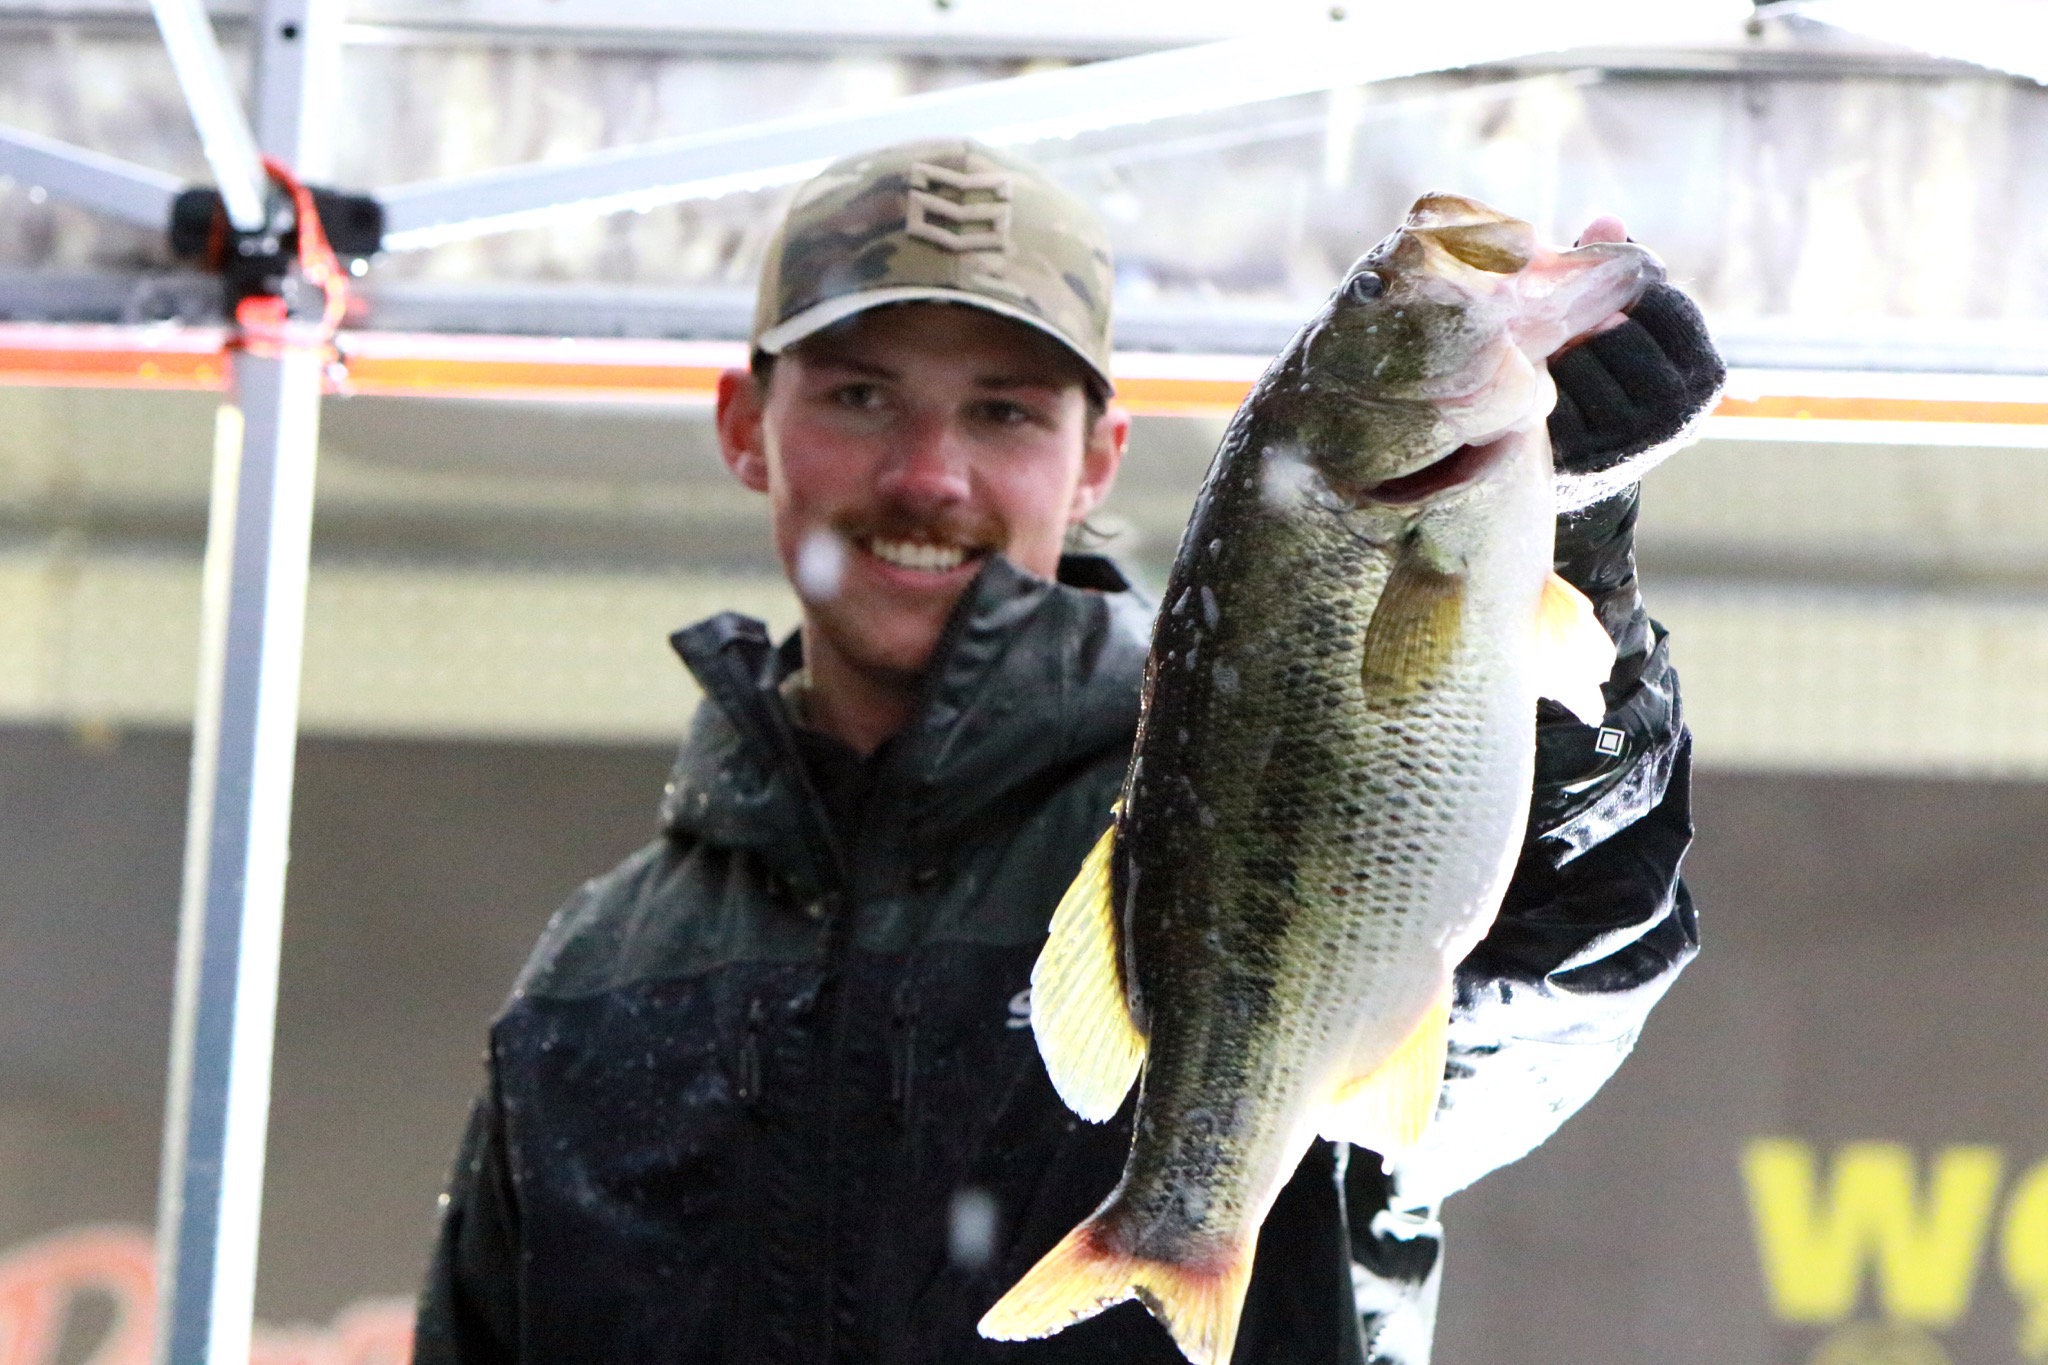 Jeff Michels Leads Day One of WON Bass Lake Shasta Open with 16.77